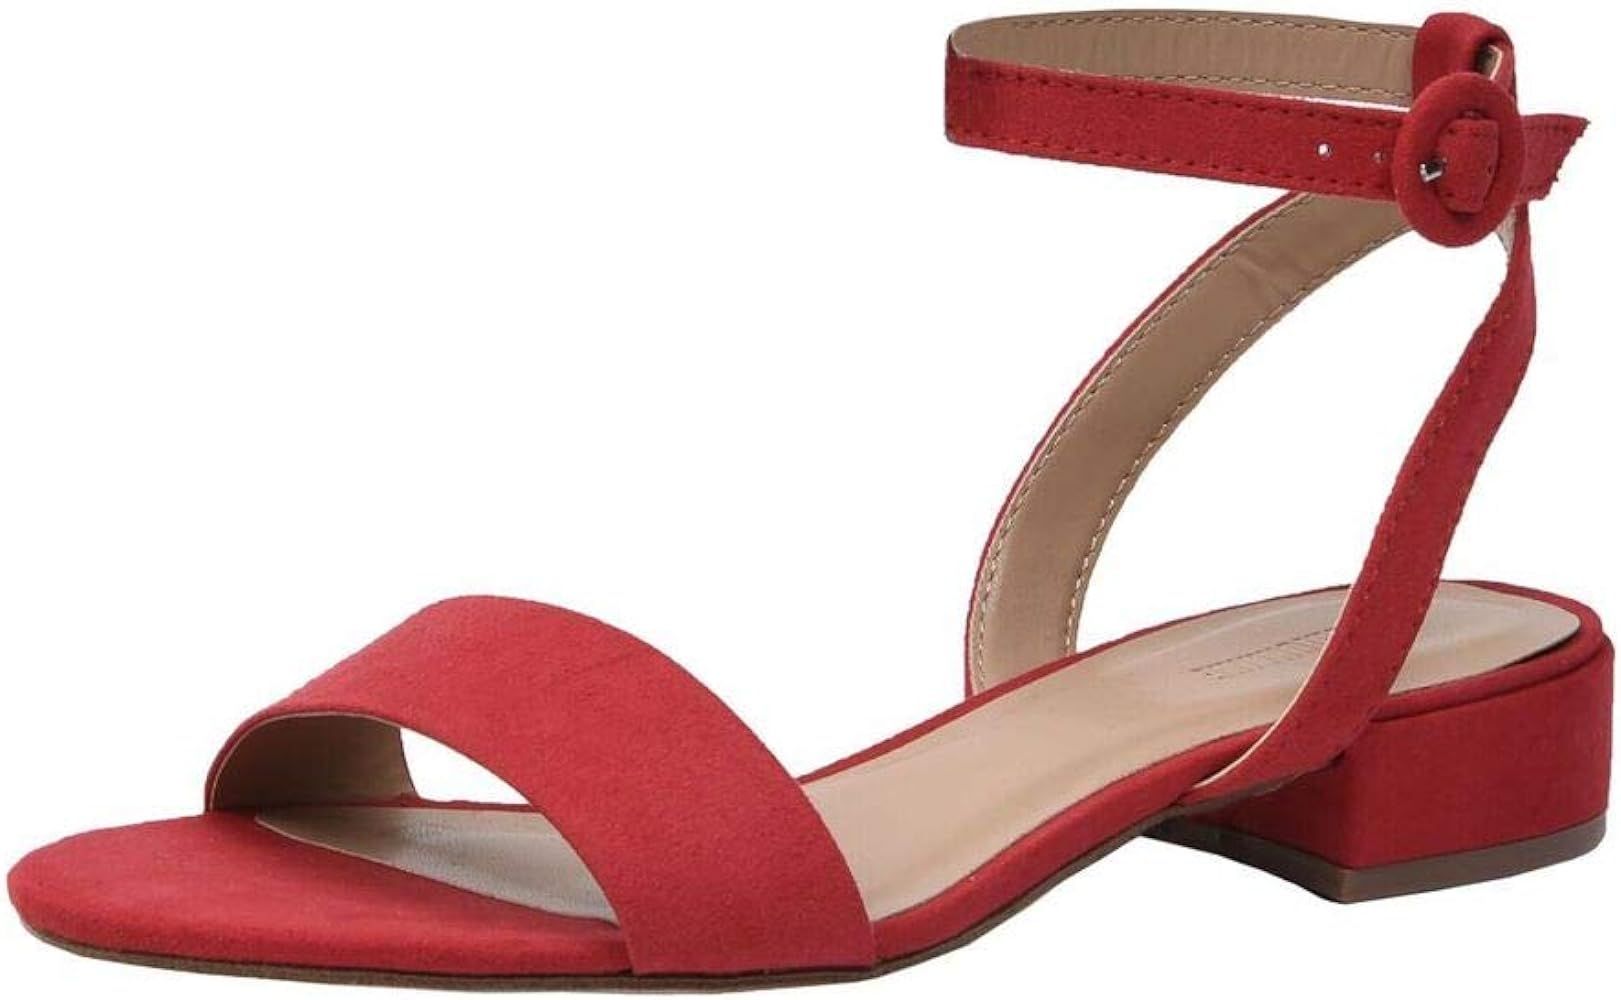 Cushionaire Women's Nila one band low block heel sandal +Wide Widths Available | Amazon (US)